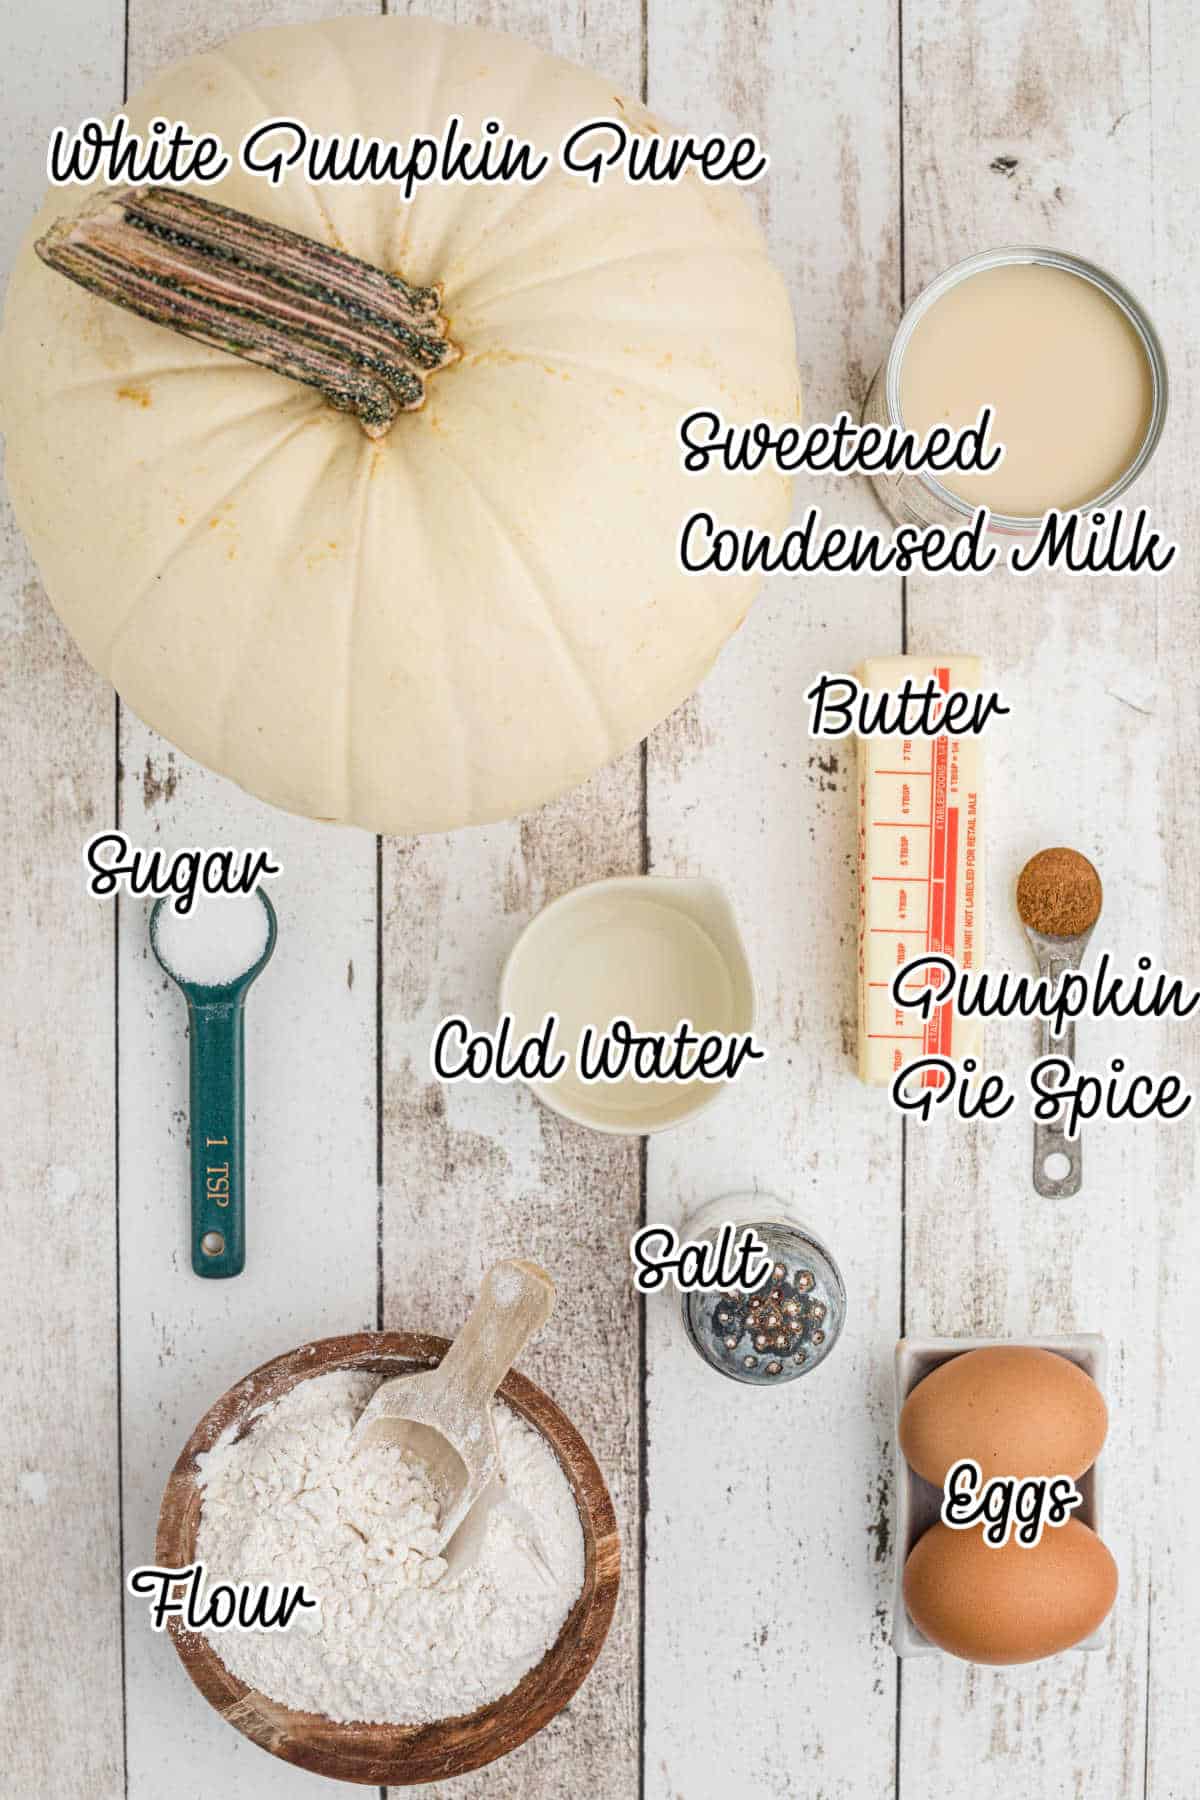 Ingredients needed all laid out showing what is needed to make a white pumpkin pie.